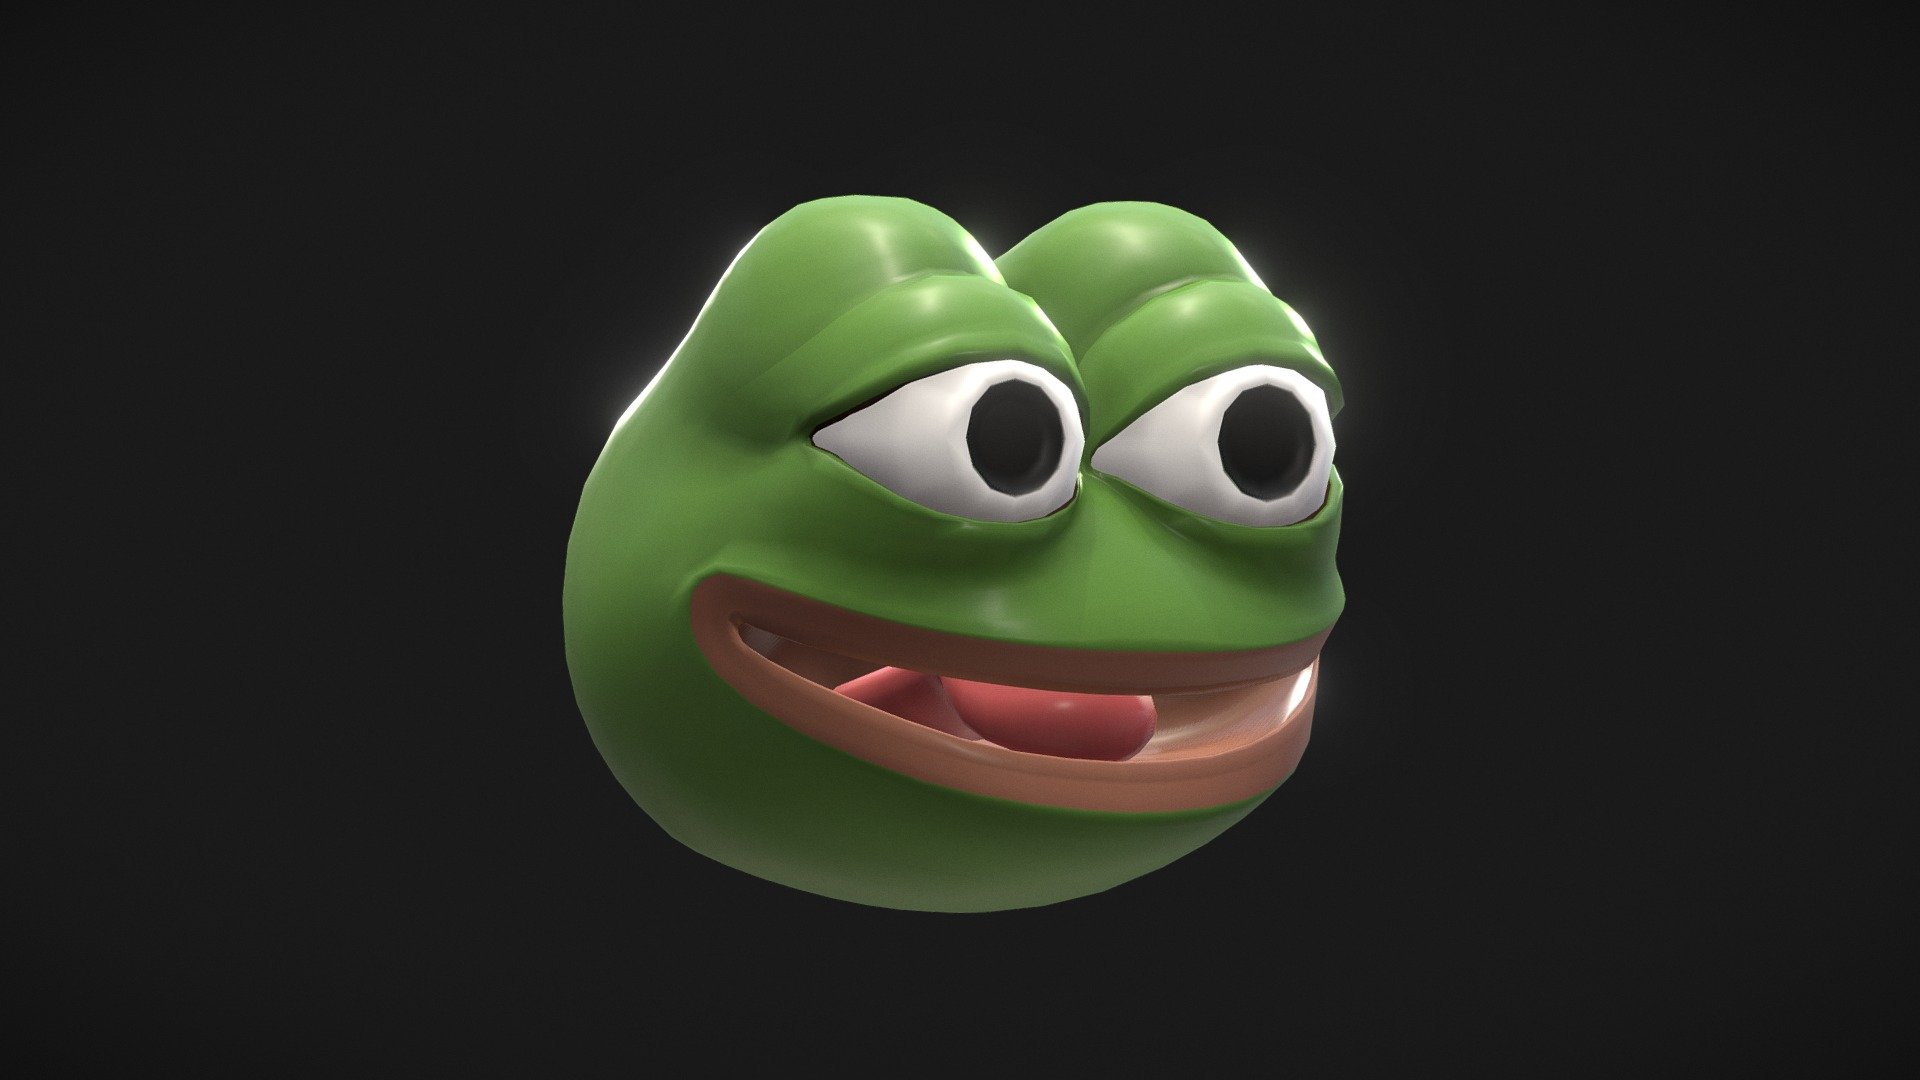 What is your favorite pepe emoji? - Forums 